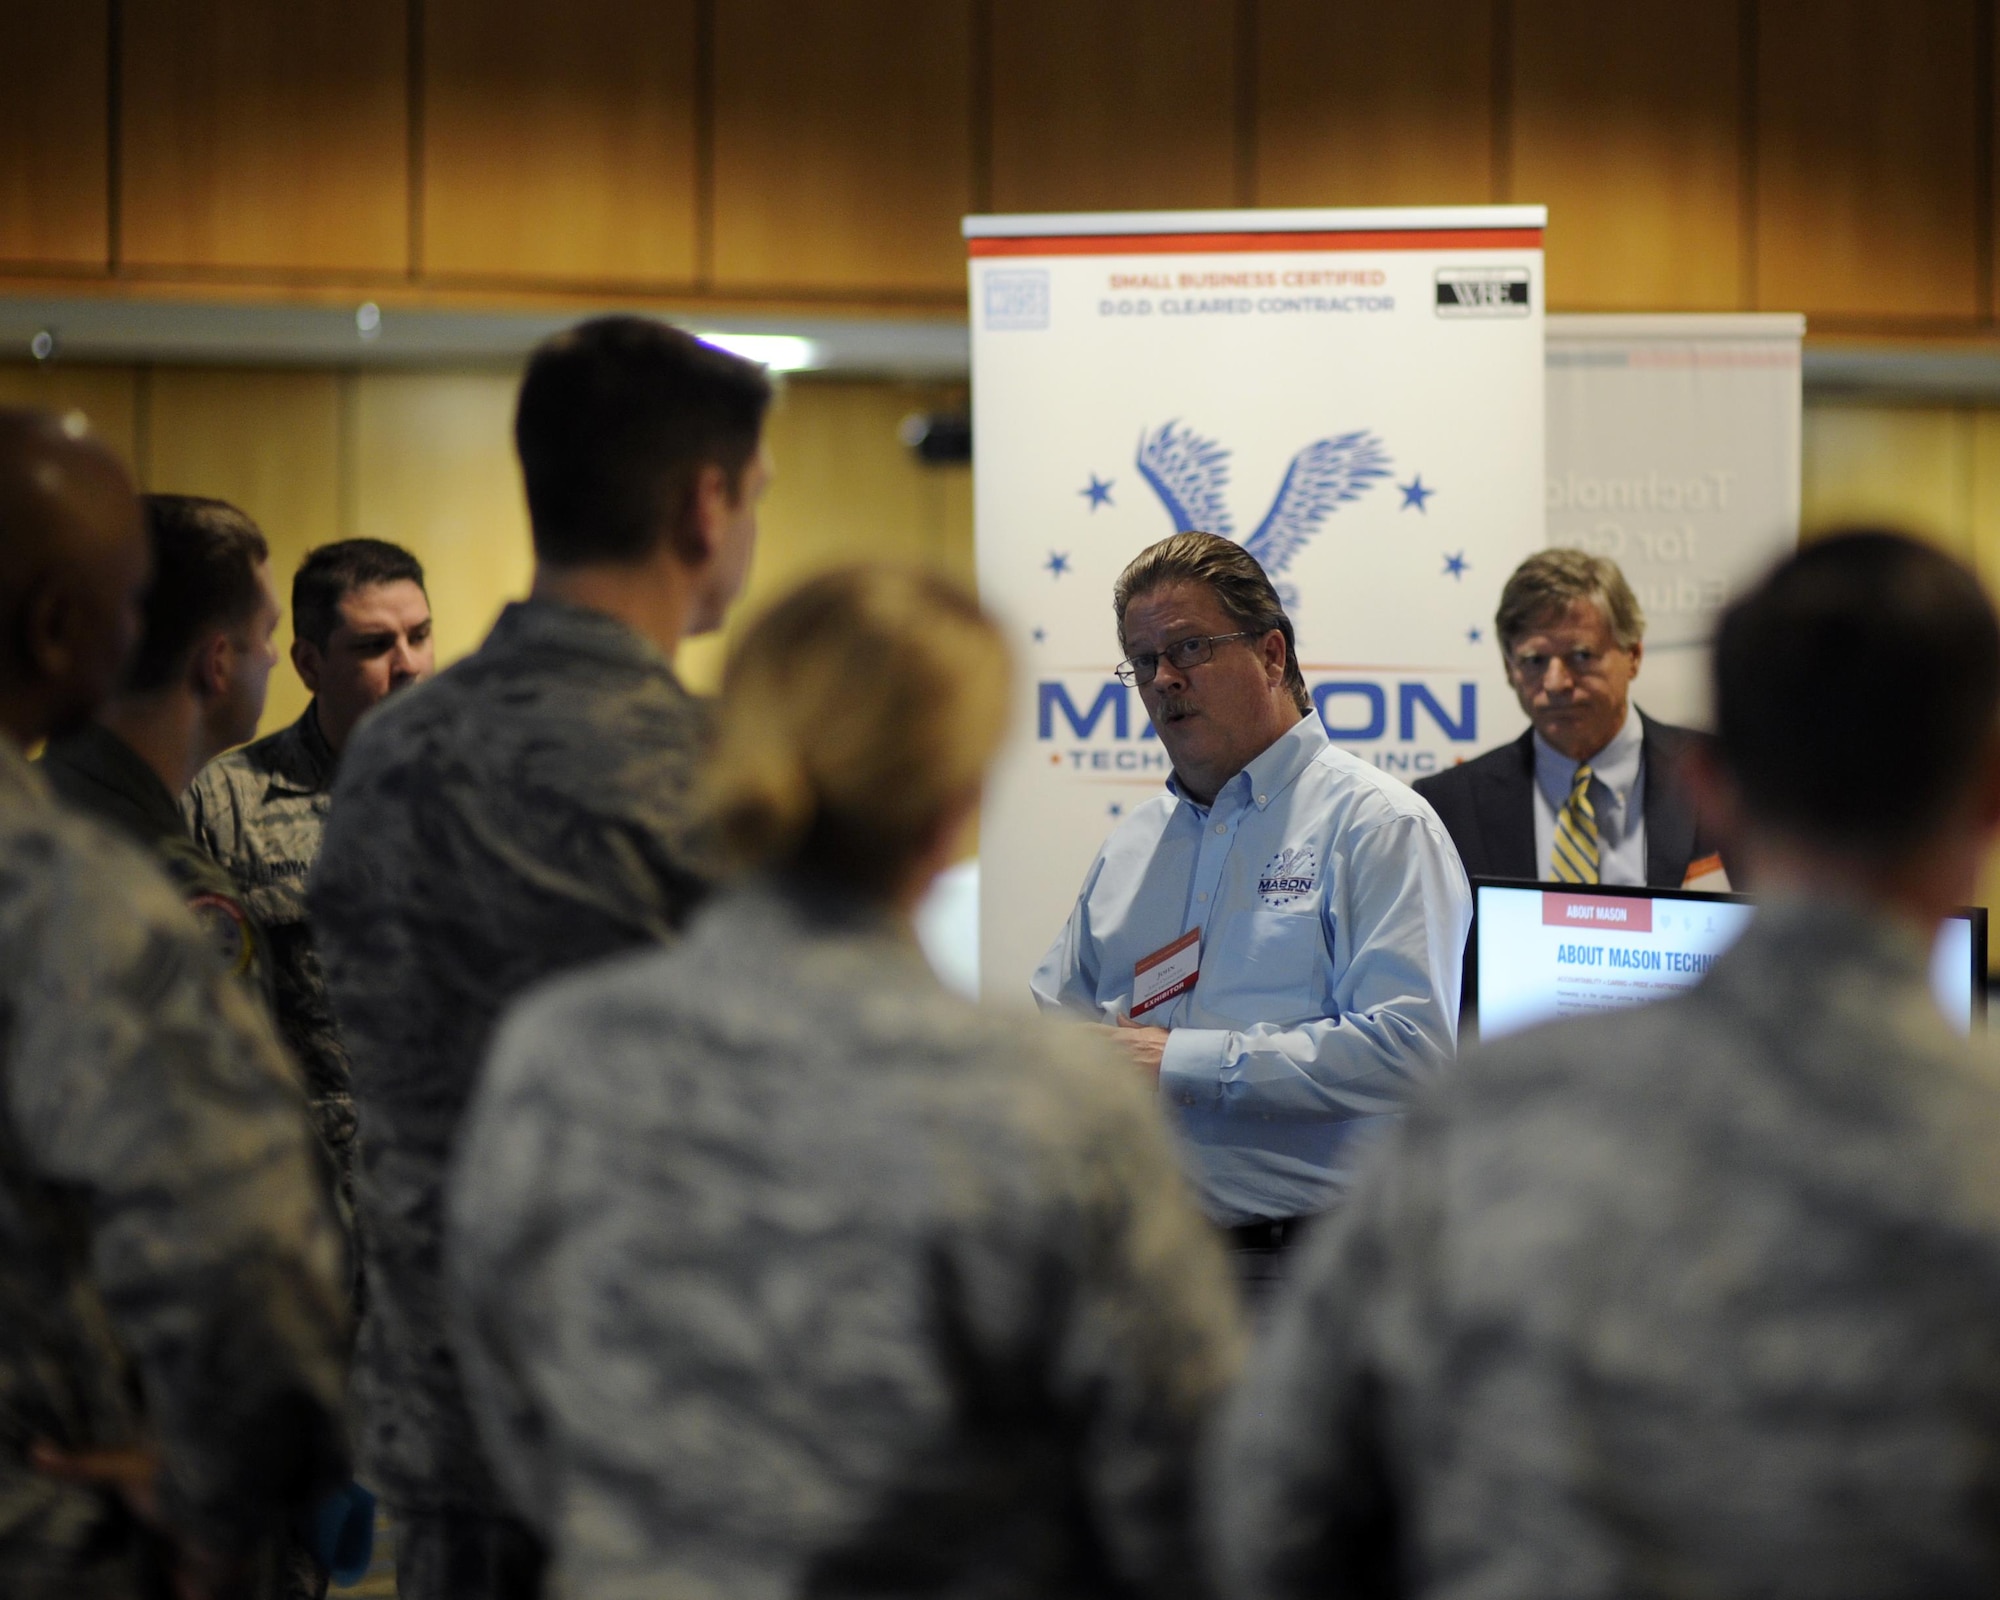 A participant of the semi-annual Technology Expo held at Tyndall, provides a briefing to Tyndall senior leadership in the Horizons Club Nov. 29, 2016. The event is hosted by Armed Forces Communications and Electronics Association at Tyndall and other Air Force installations in order to forge a relationship between the Department of Defense and technology industries to provide the most current solution for any mission. (U.S. Air Force photo by Senior Airman Solomon Cook/Released)